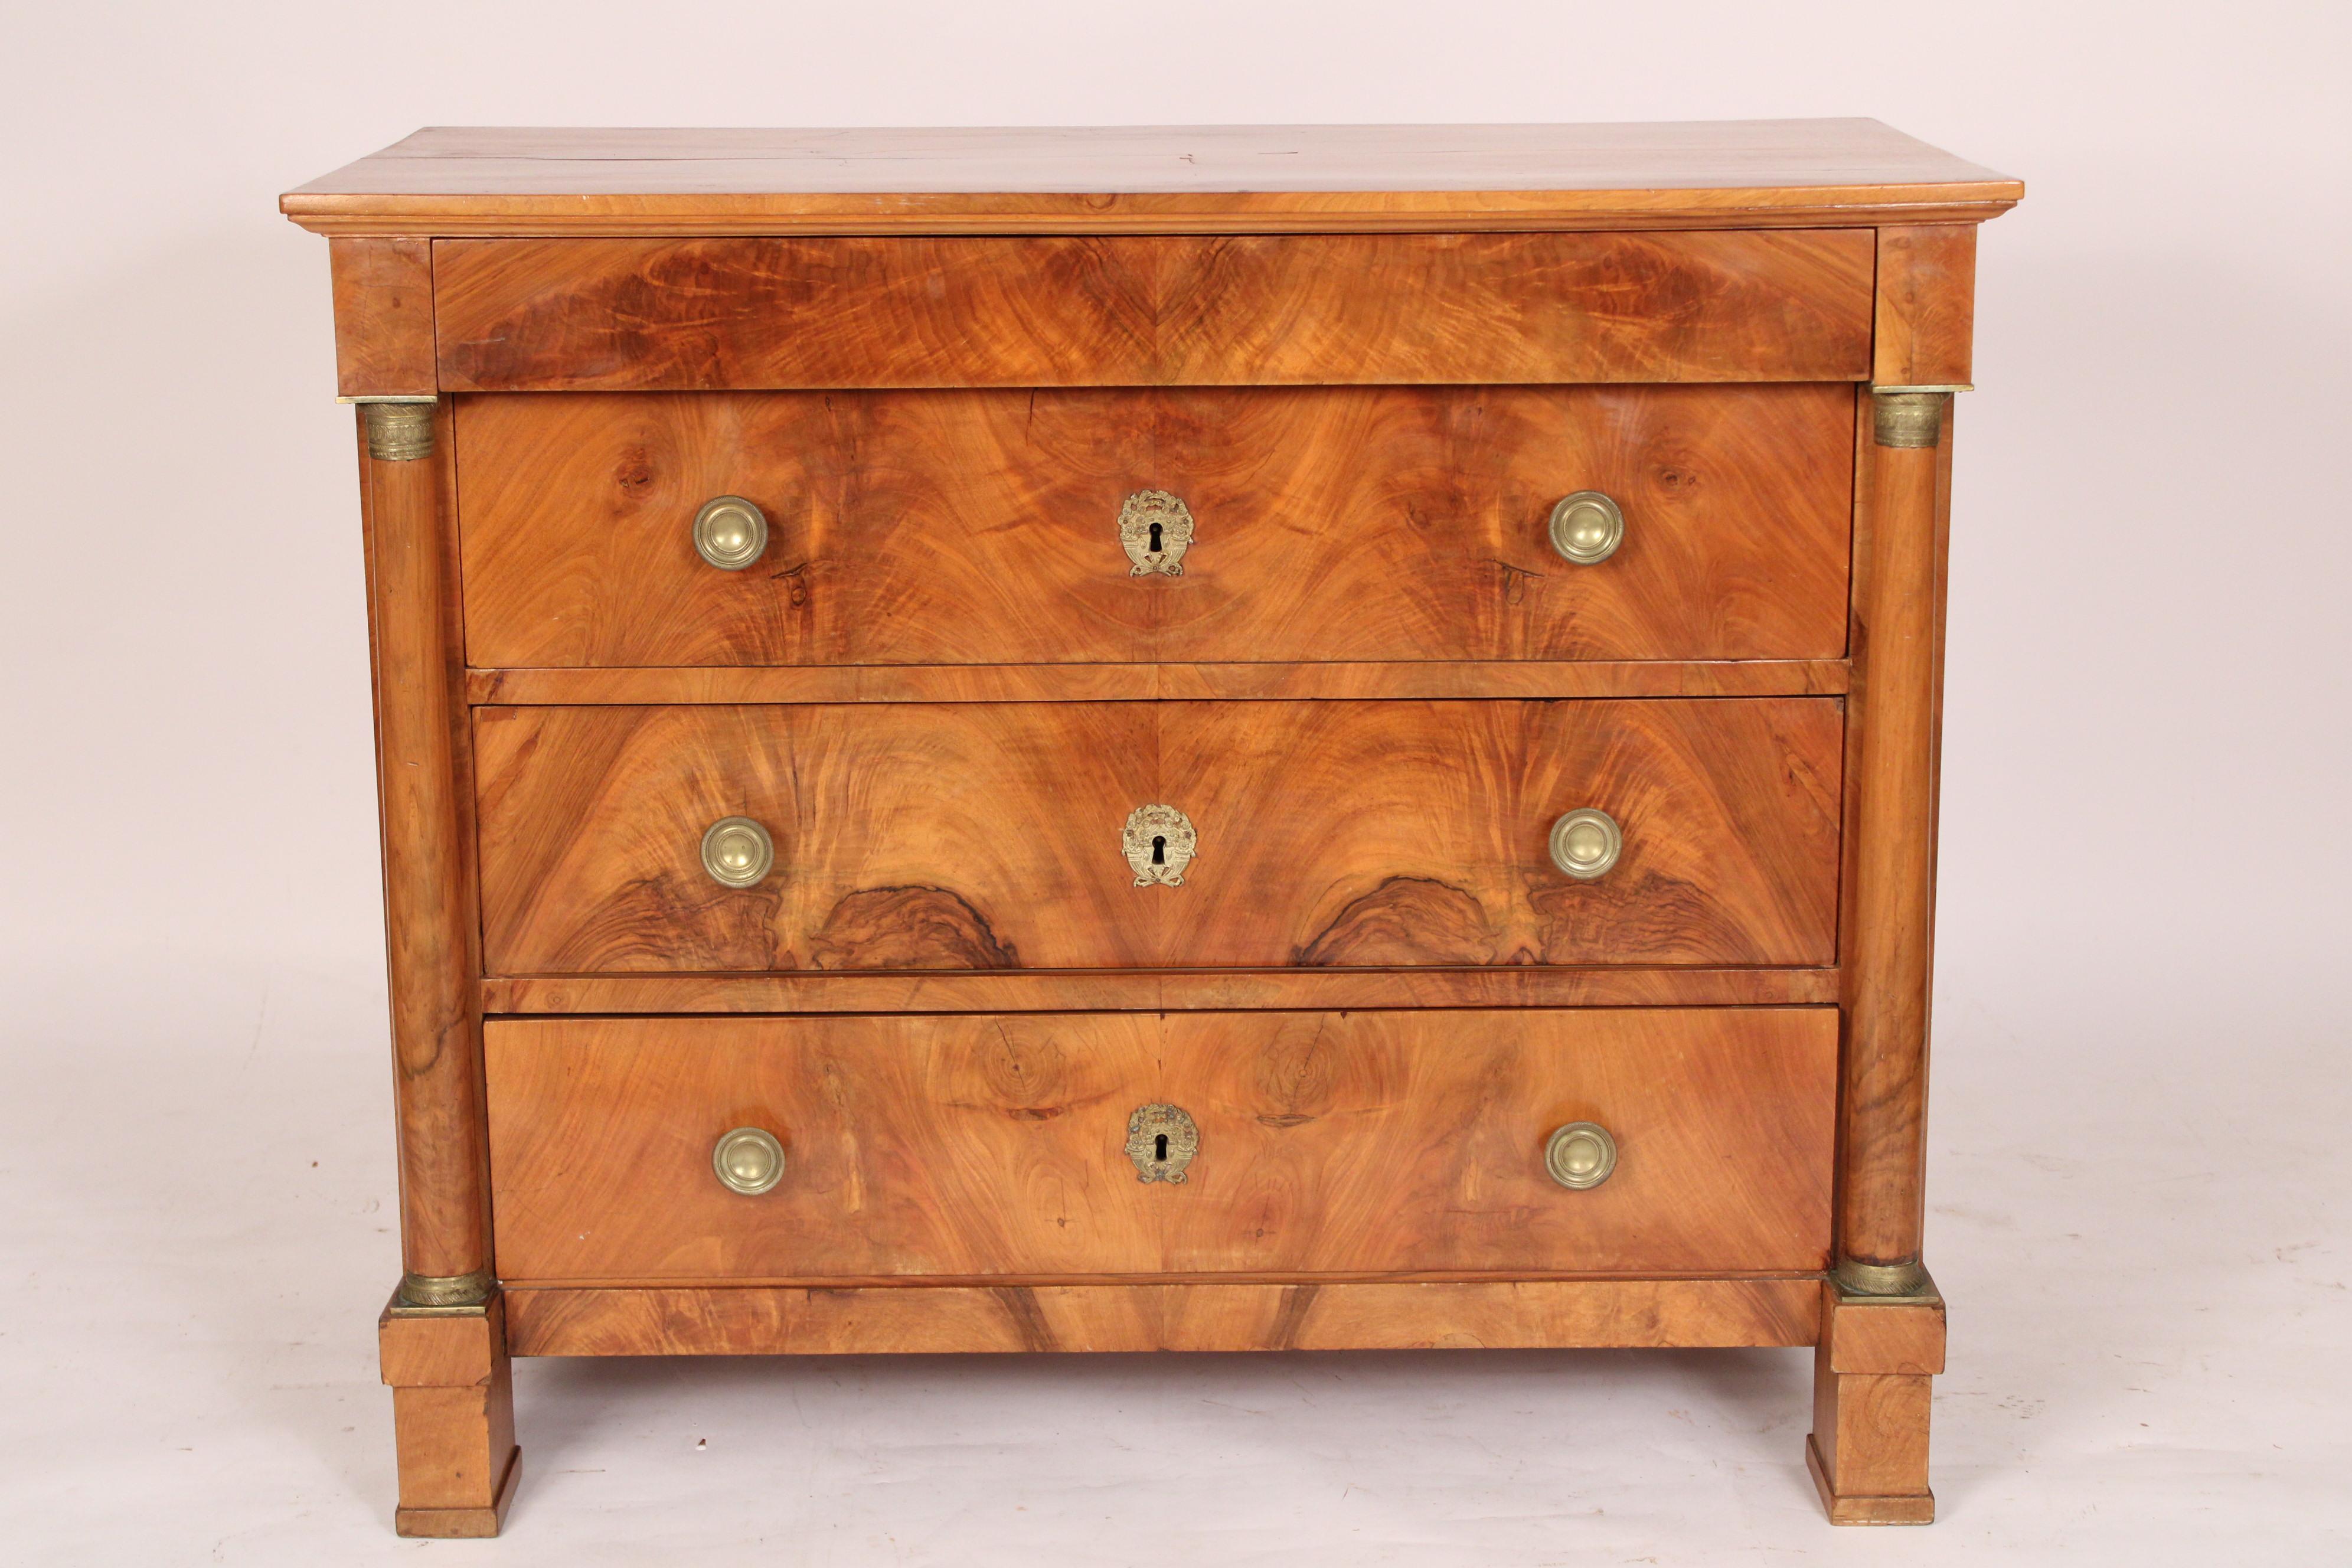 Antique Empire style burl walnut chest of drawers, late 19th century. With an overhanging burl walnut two board top,  an overhanging frieze drawer and 3 burl walnut drawers with bronze knobs and bronze escutcheons,  drawers flanked by columns with